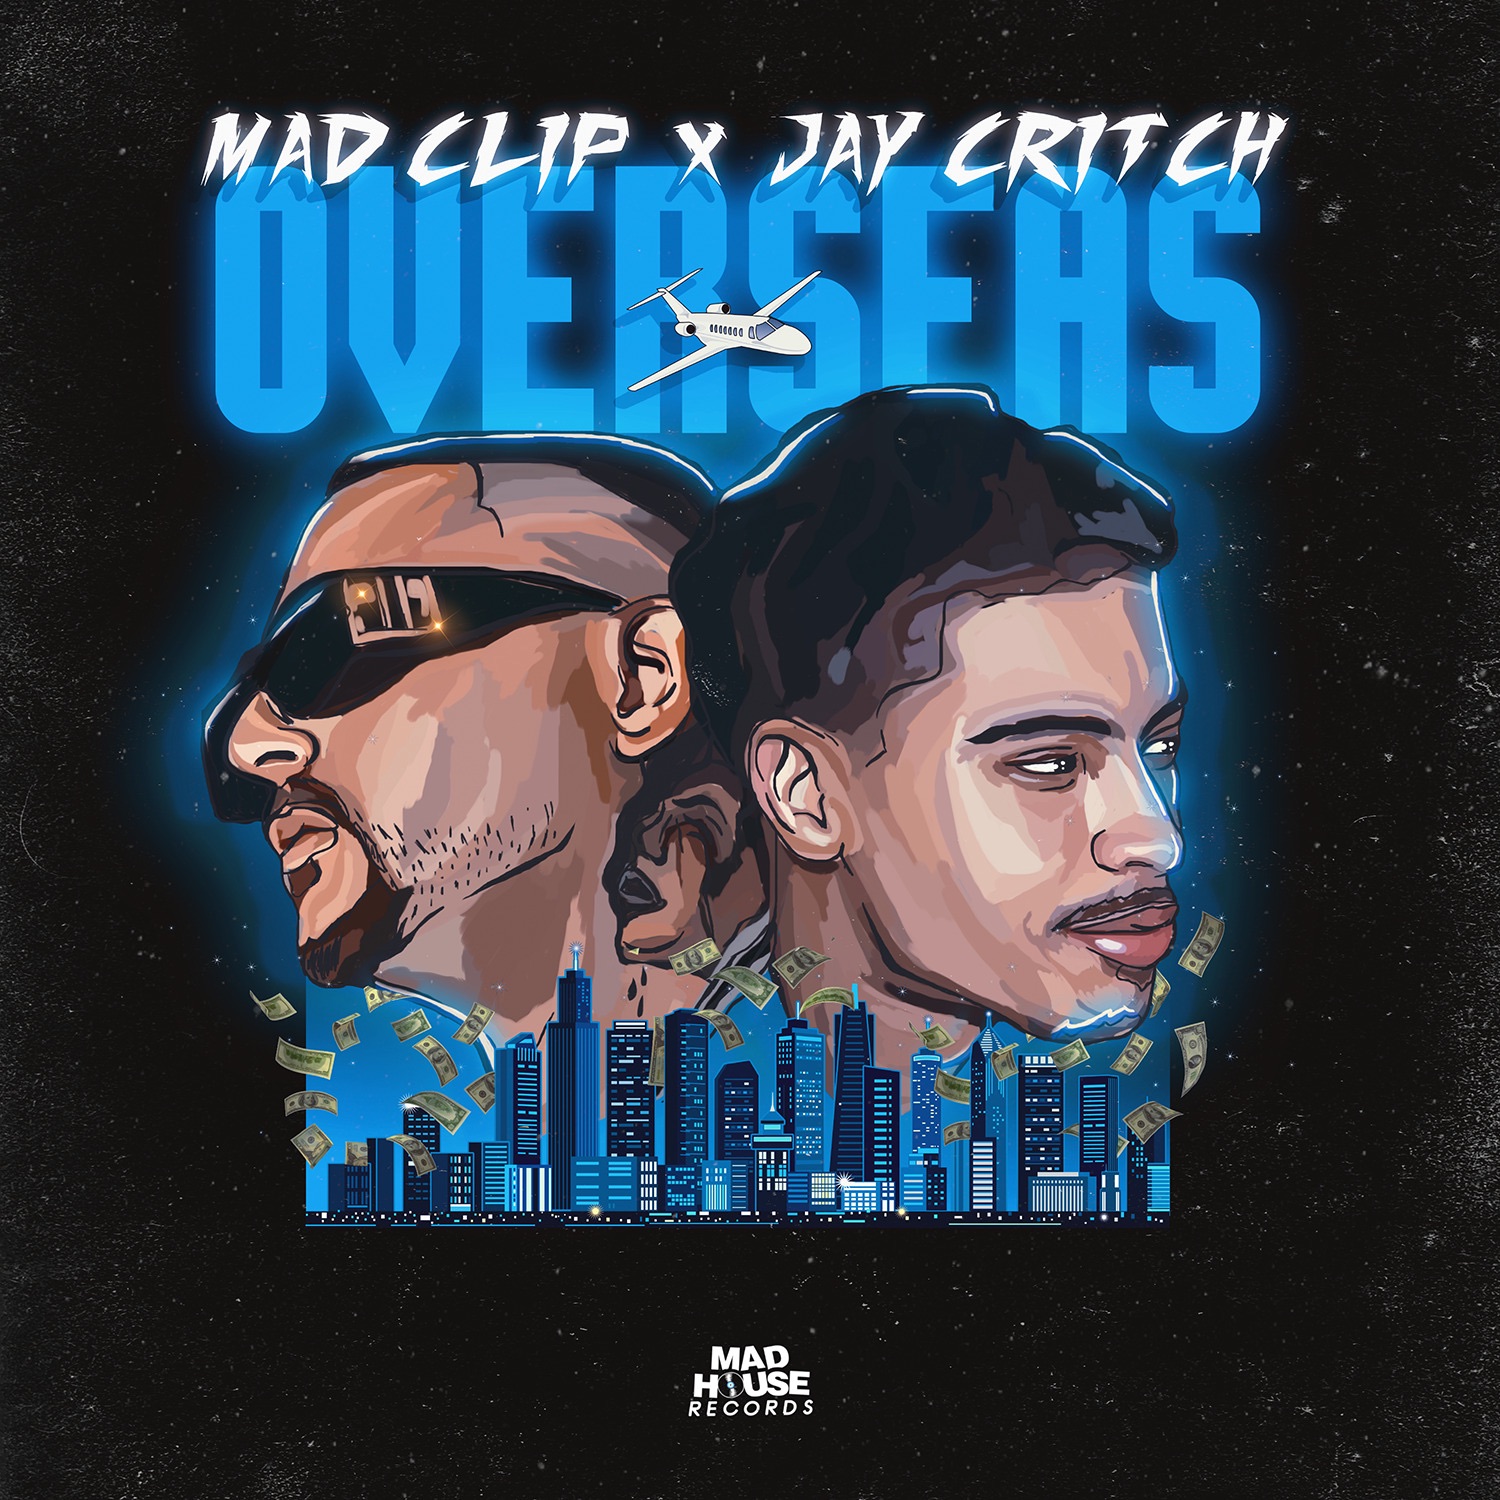 Mad Clip, Jay Critch & Mike G - Overseas - Single